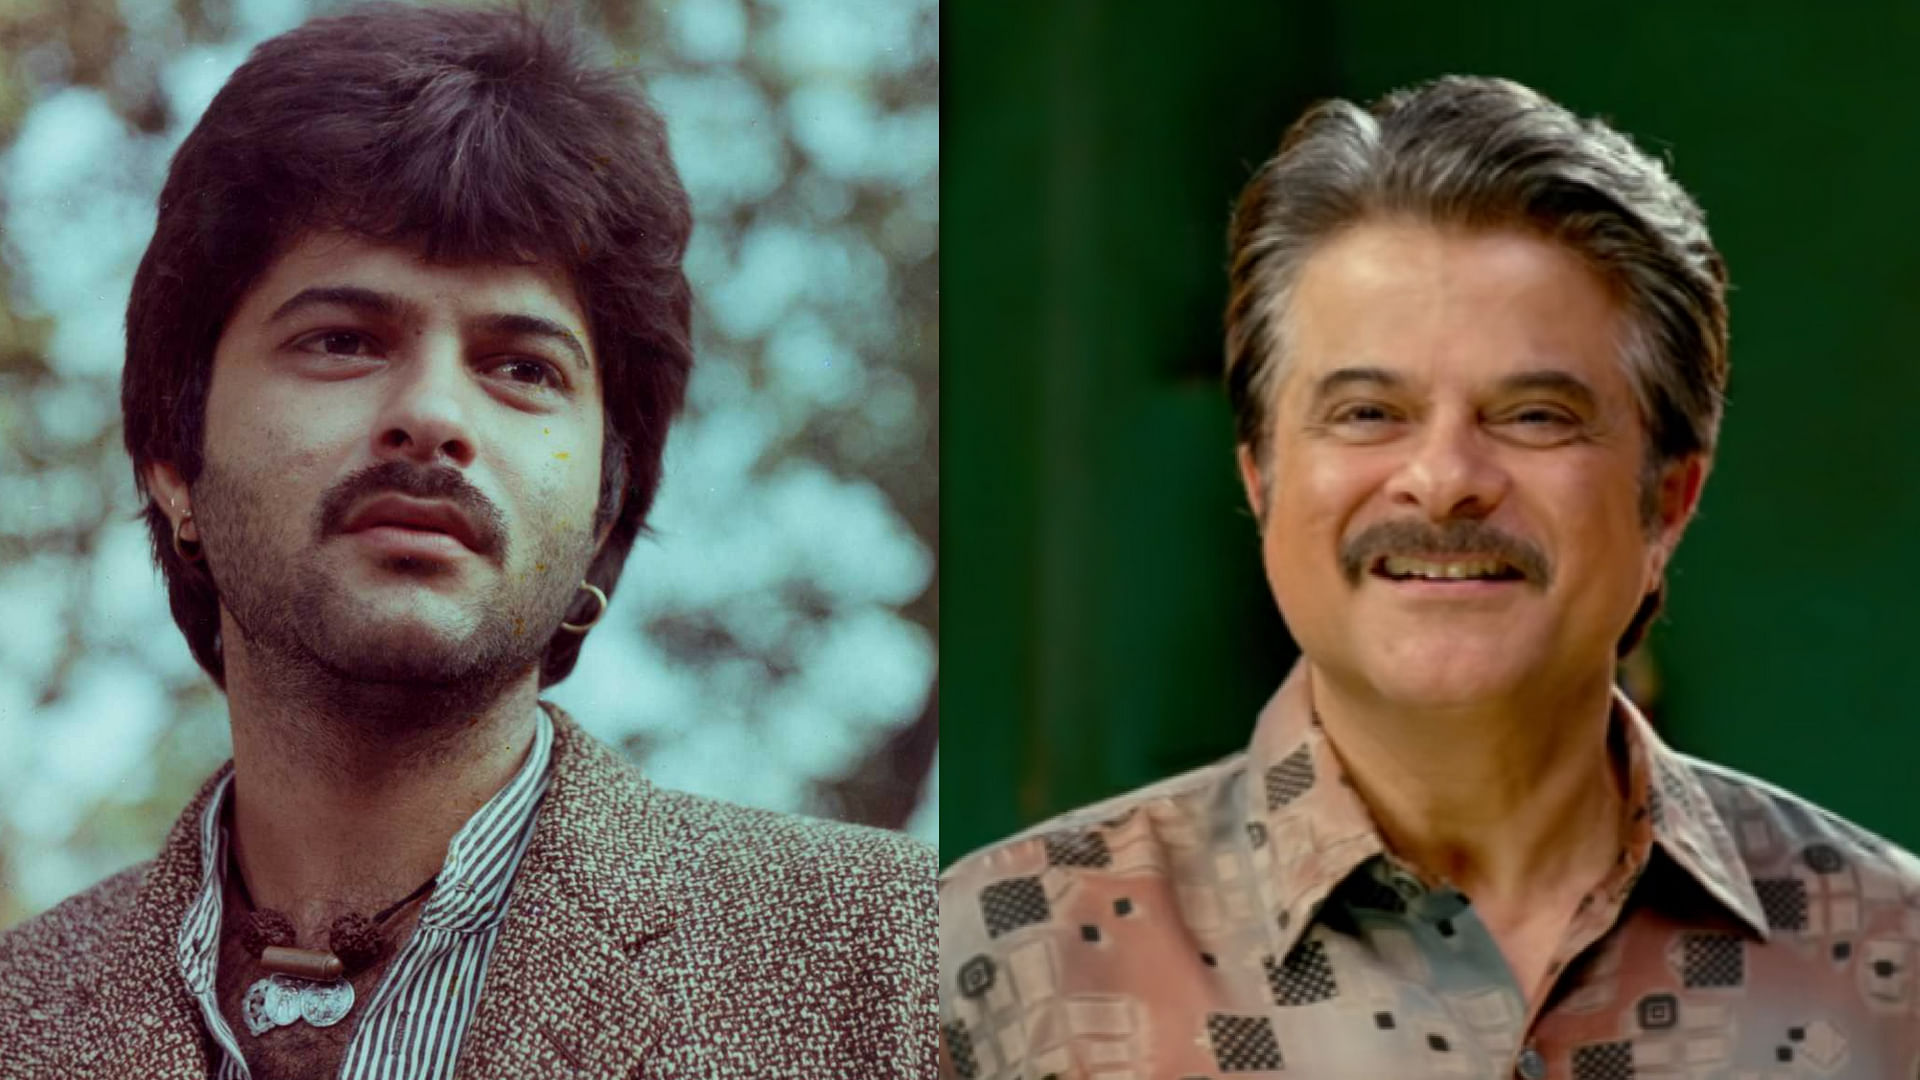 Anil Kapoor in <i>Woh Saat Din</i> and <i>Fanney Khan</i>.